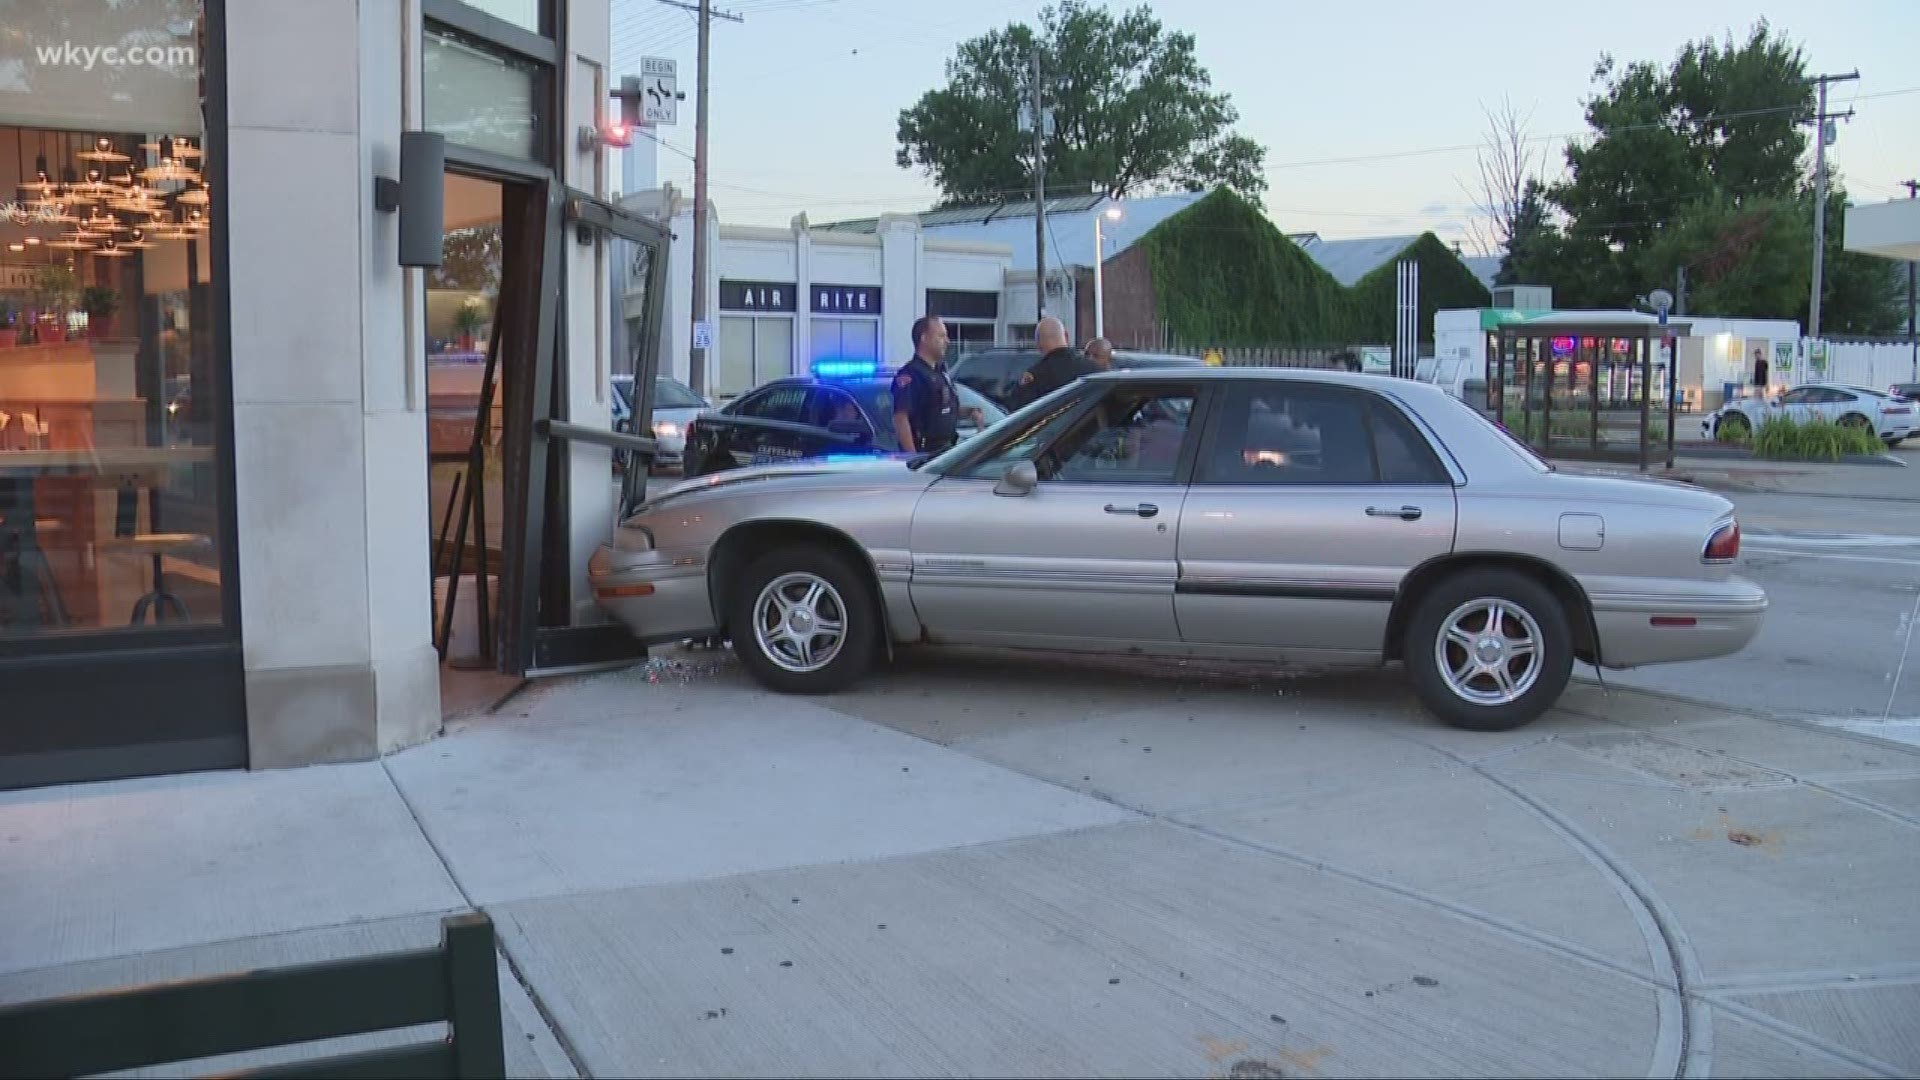 Car crashes into front of Landmark restaurant at W. 117th and Clifton Blvd.